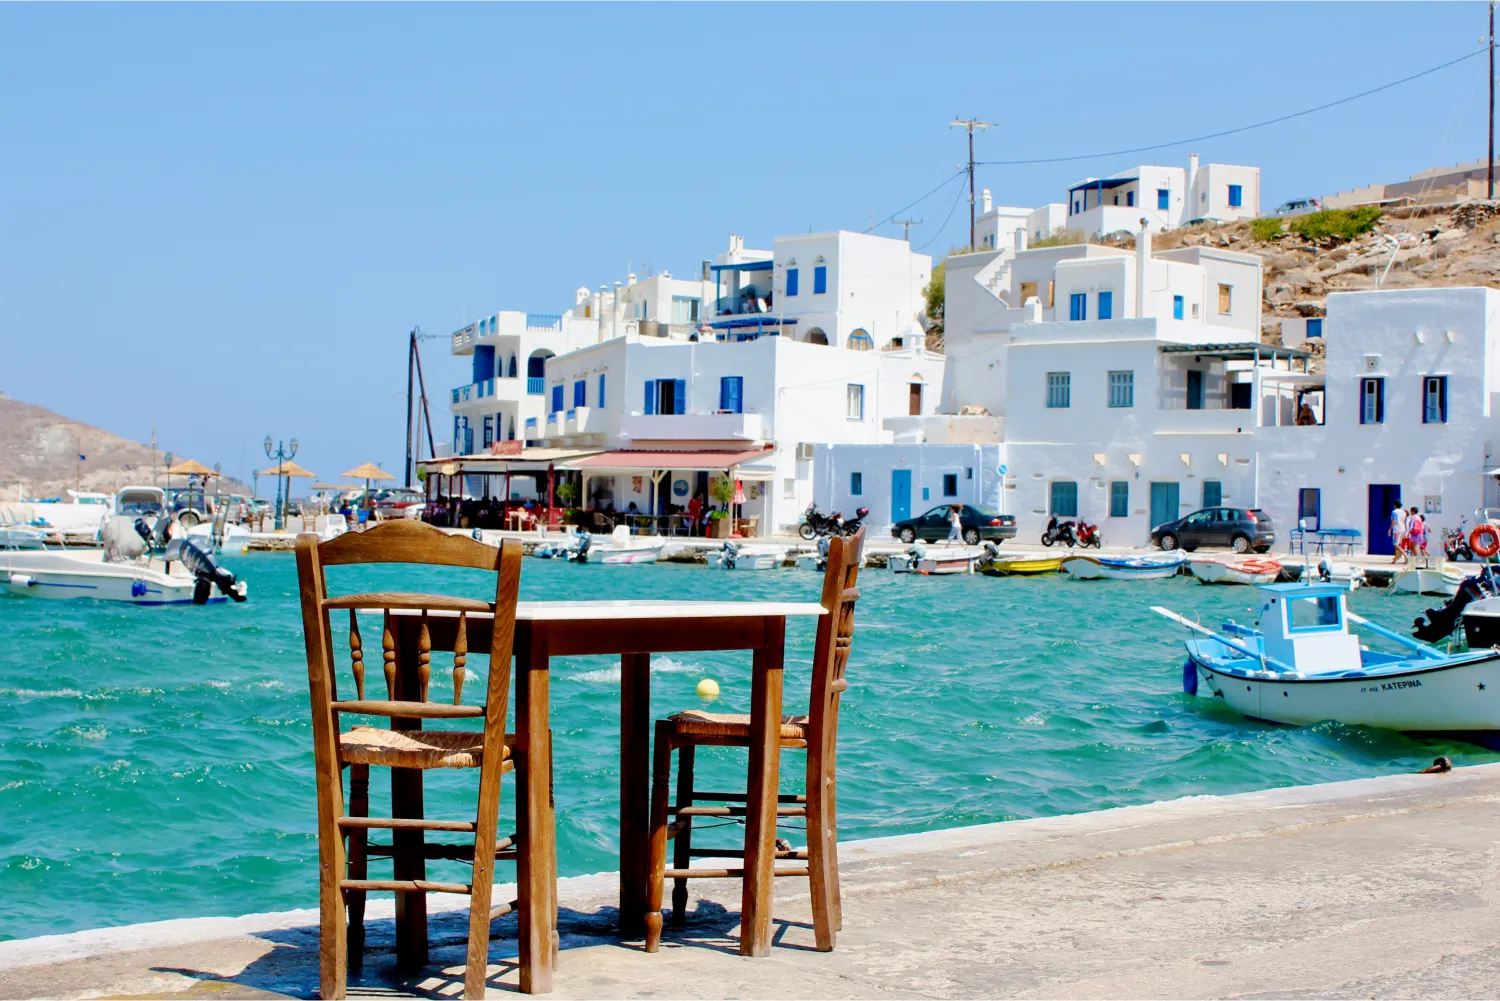 A Table For Two Awaiting Customer By A Quaint Harbour in Tinos